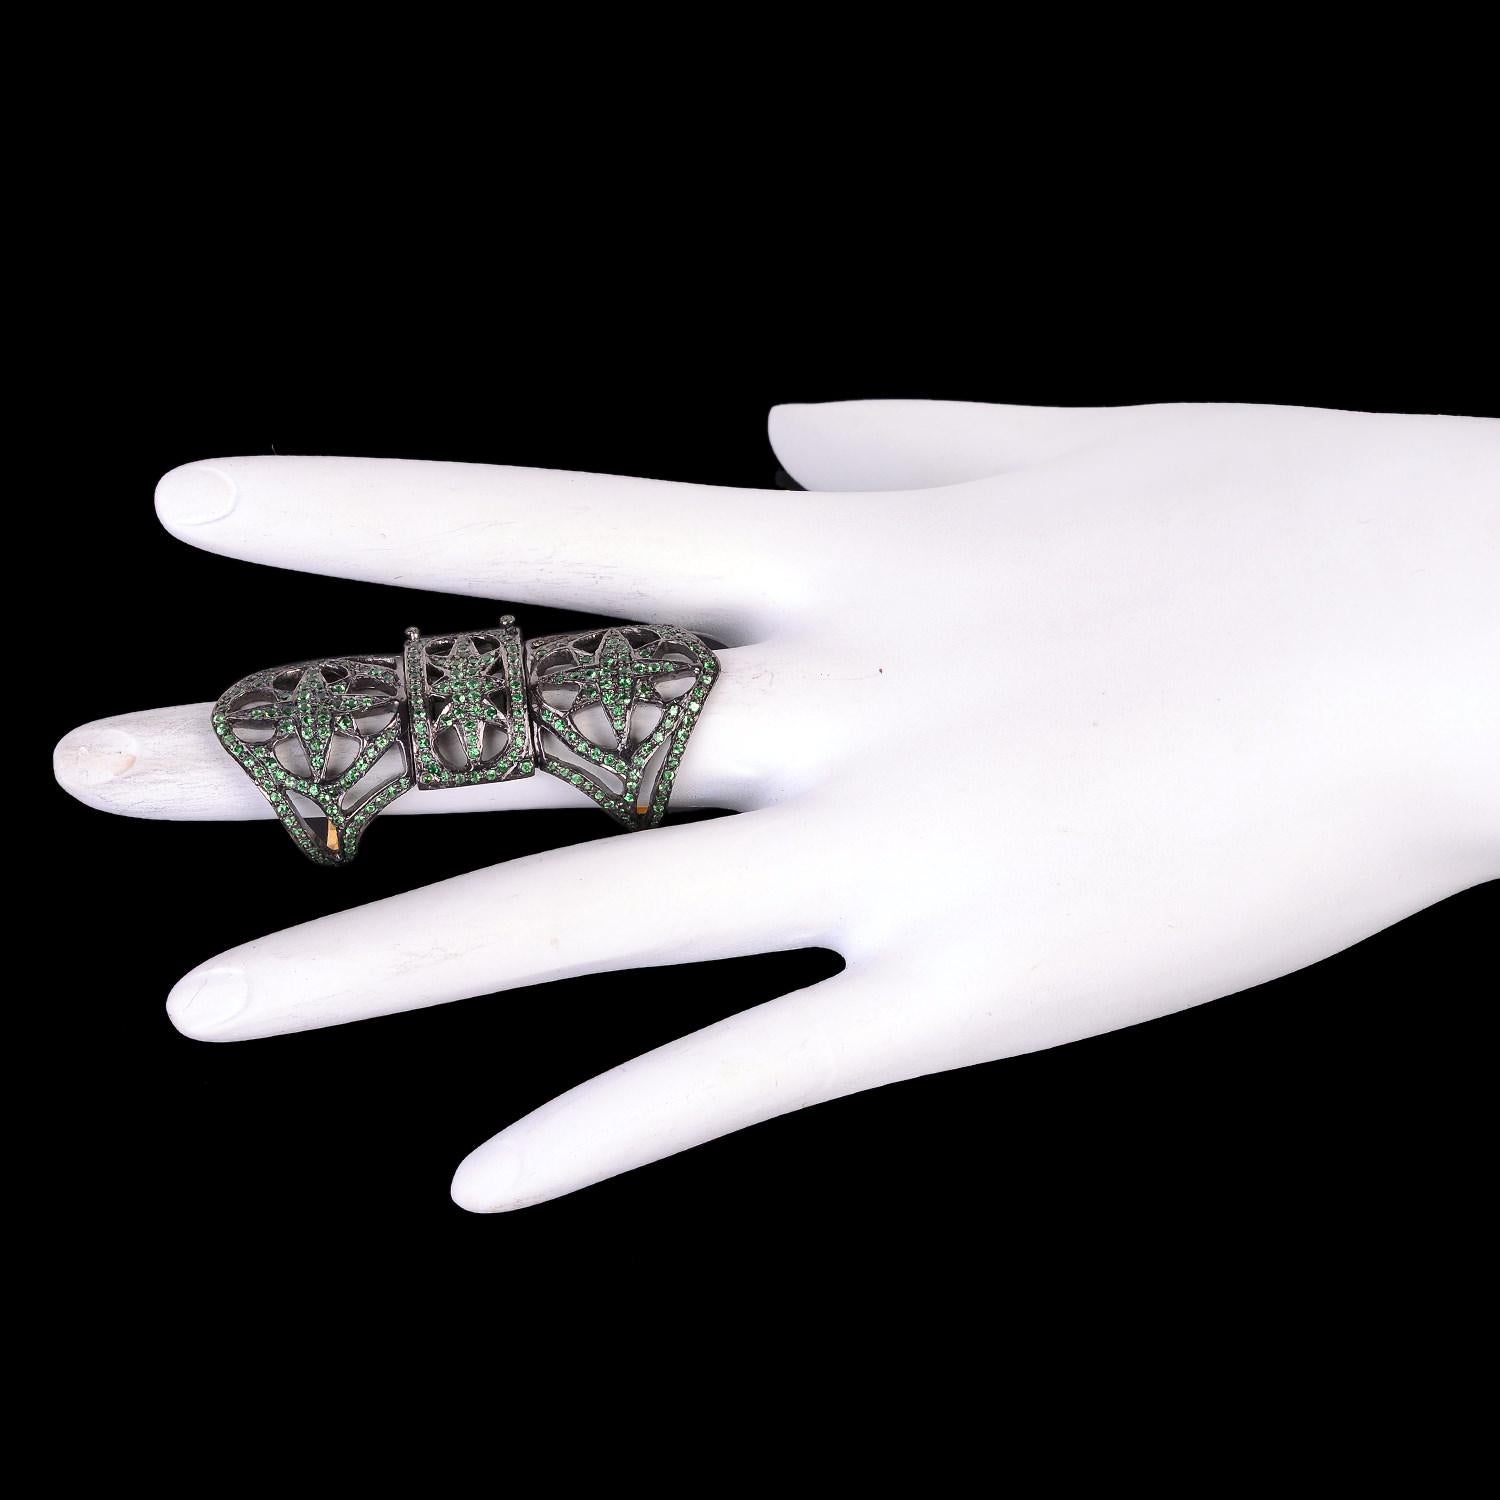 Modern and Designer Tsavorite long ring set in Silver and 18K Gold has cross motif making it look a cool gothic piece.

Ring Size: 7 ( Can be sized )

18Kt: 3.16gms
SiIver: 8.06gms
Tsavorite: 1.71cts